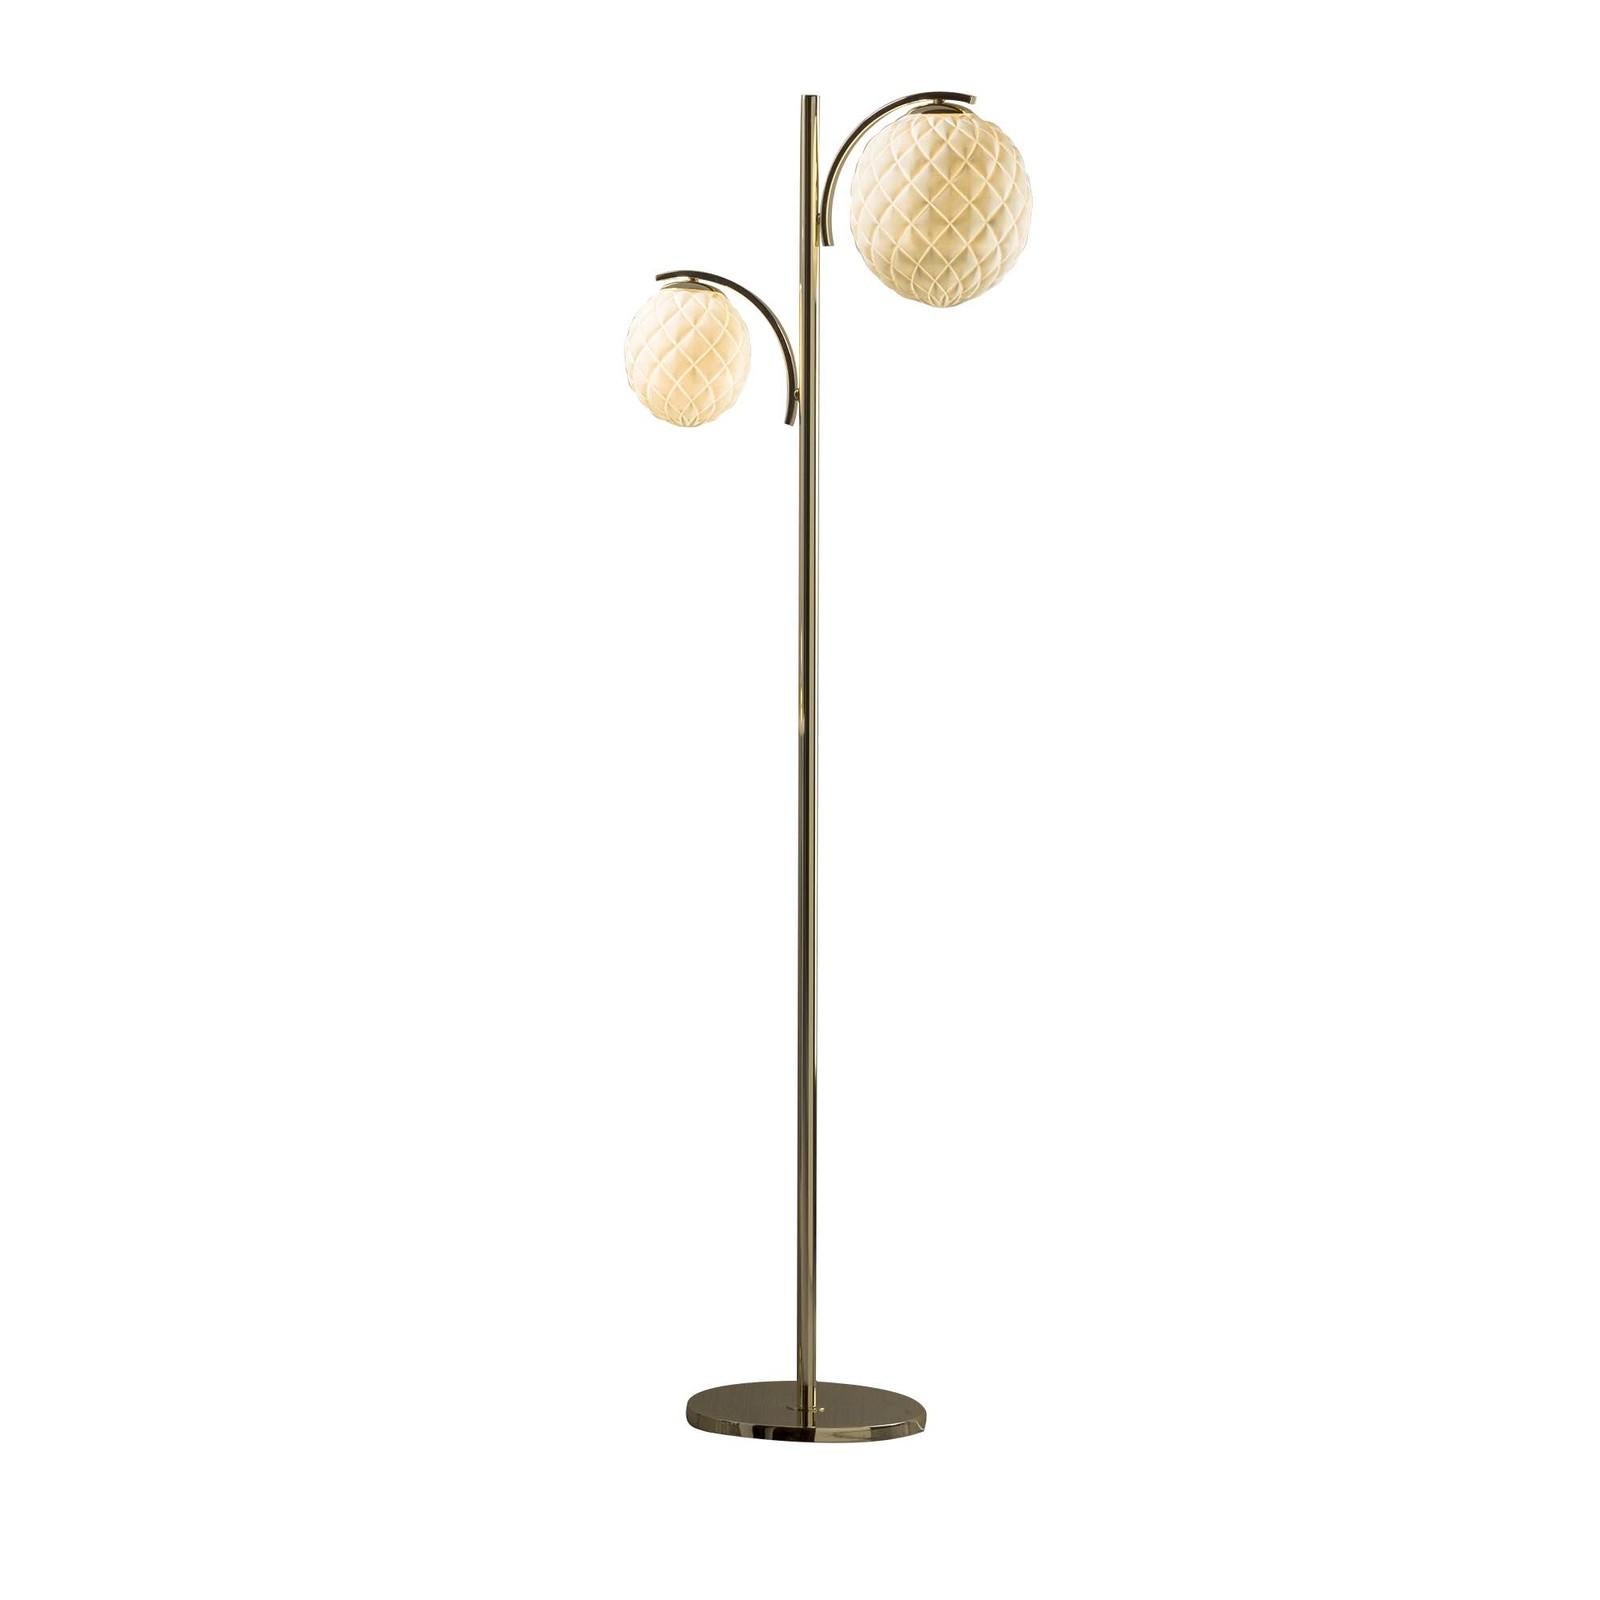 A delicate interplay of volumes and textures catches the eye in this magnificent floor lamp that creates a mesmerizing ambiance light in any room in the house. The structure in brass with a round base and elongated stem opens up at the top in two